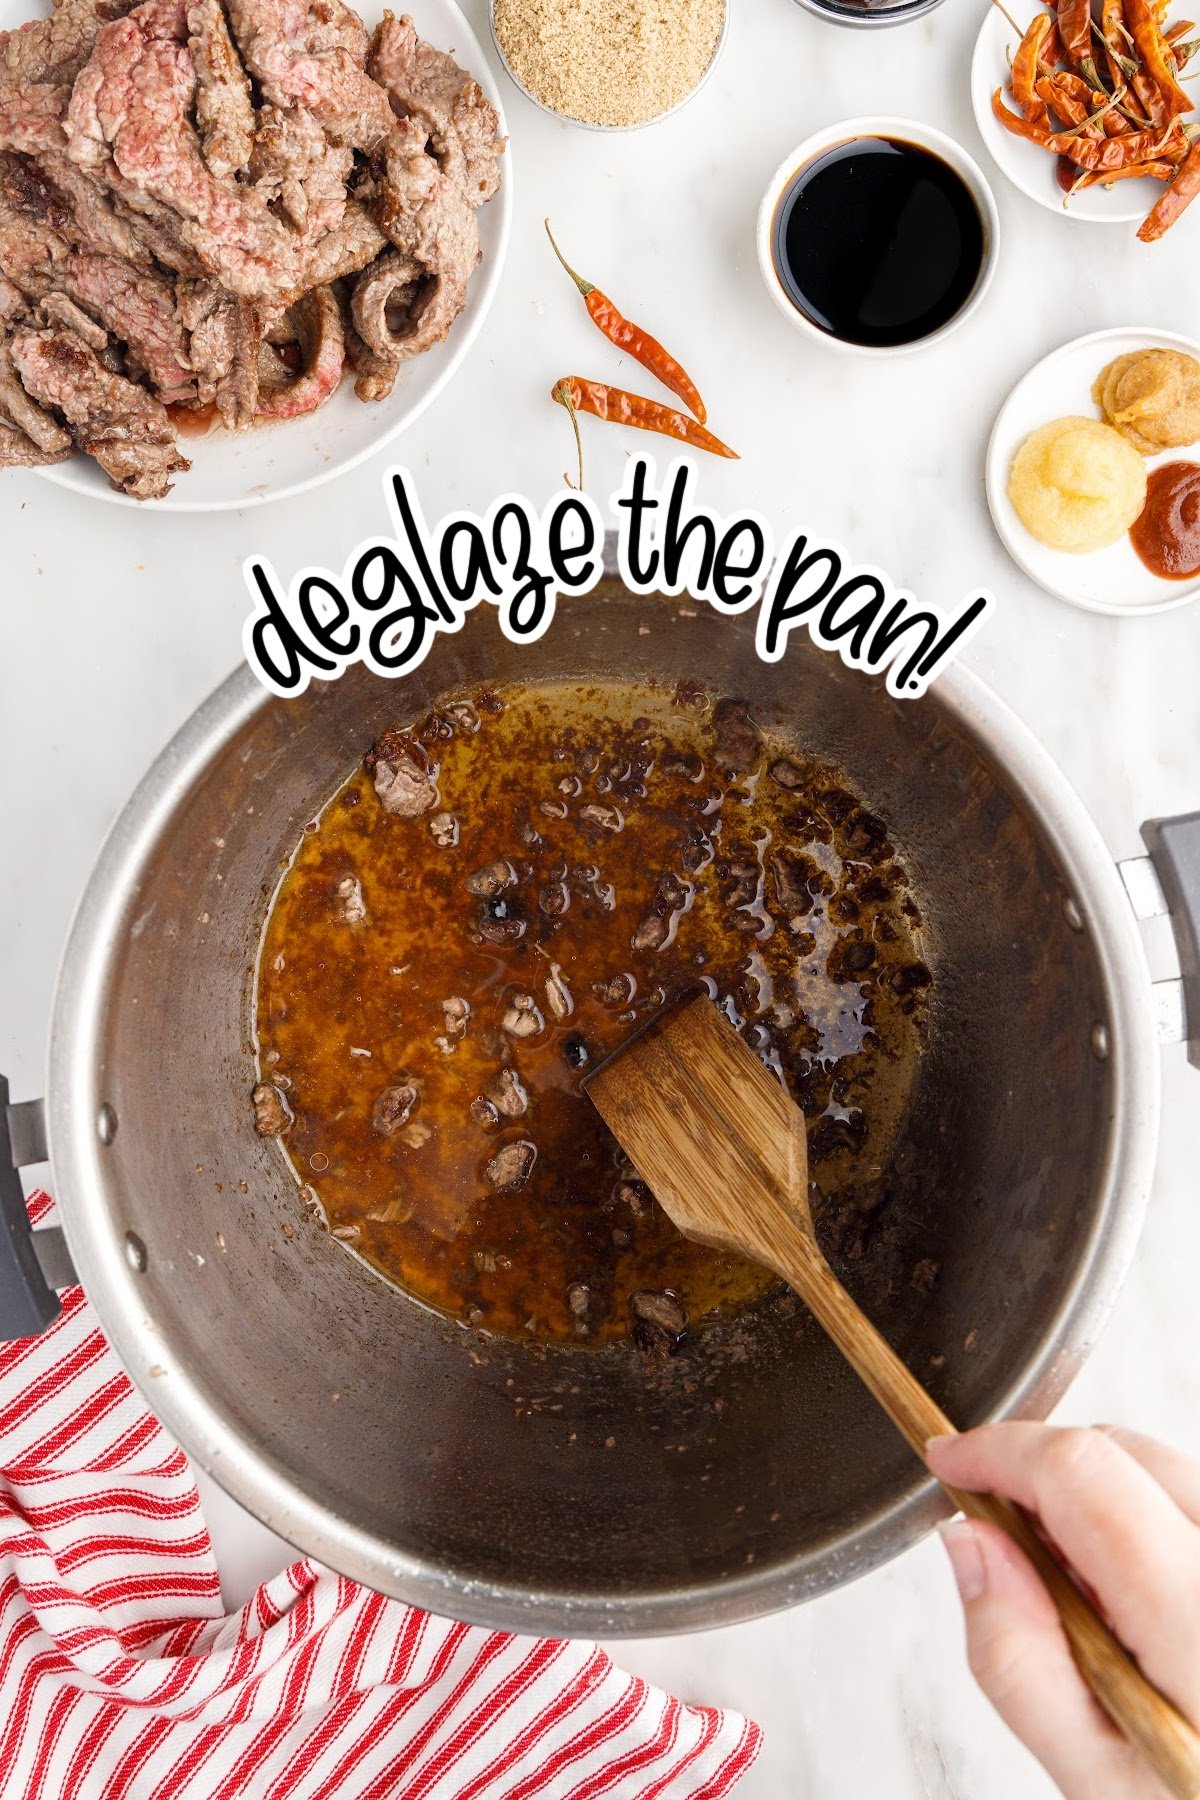 Beef broth added to the instant pot to deglaze the pot.